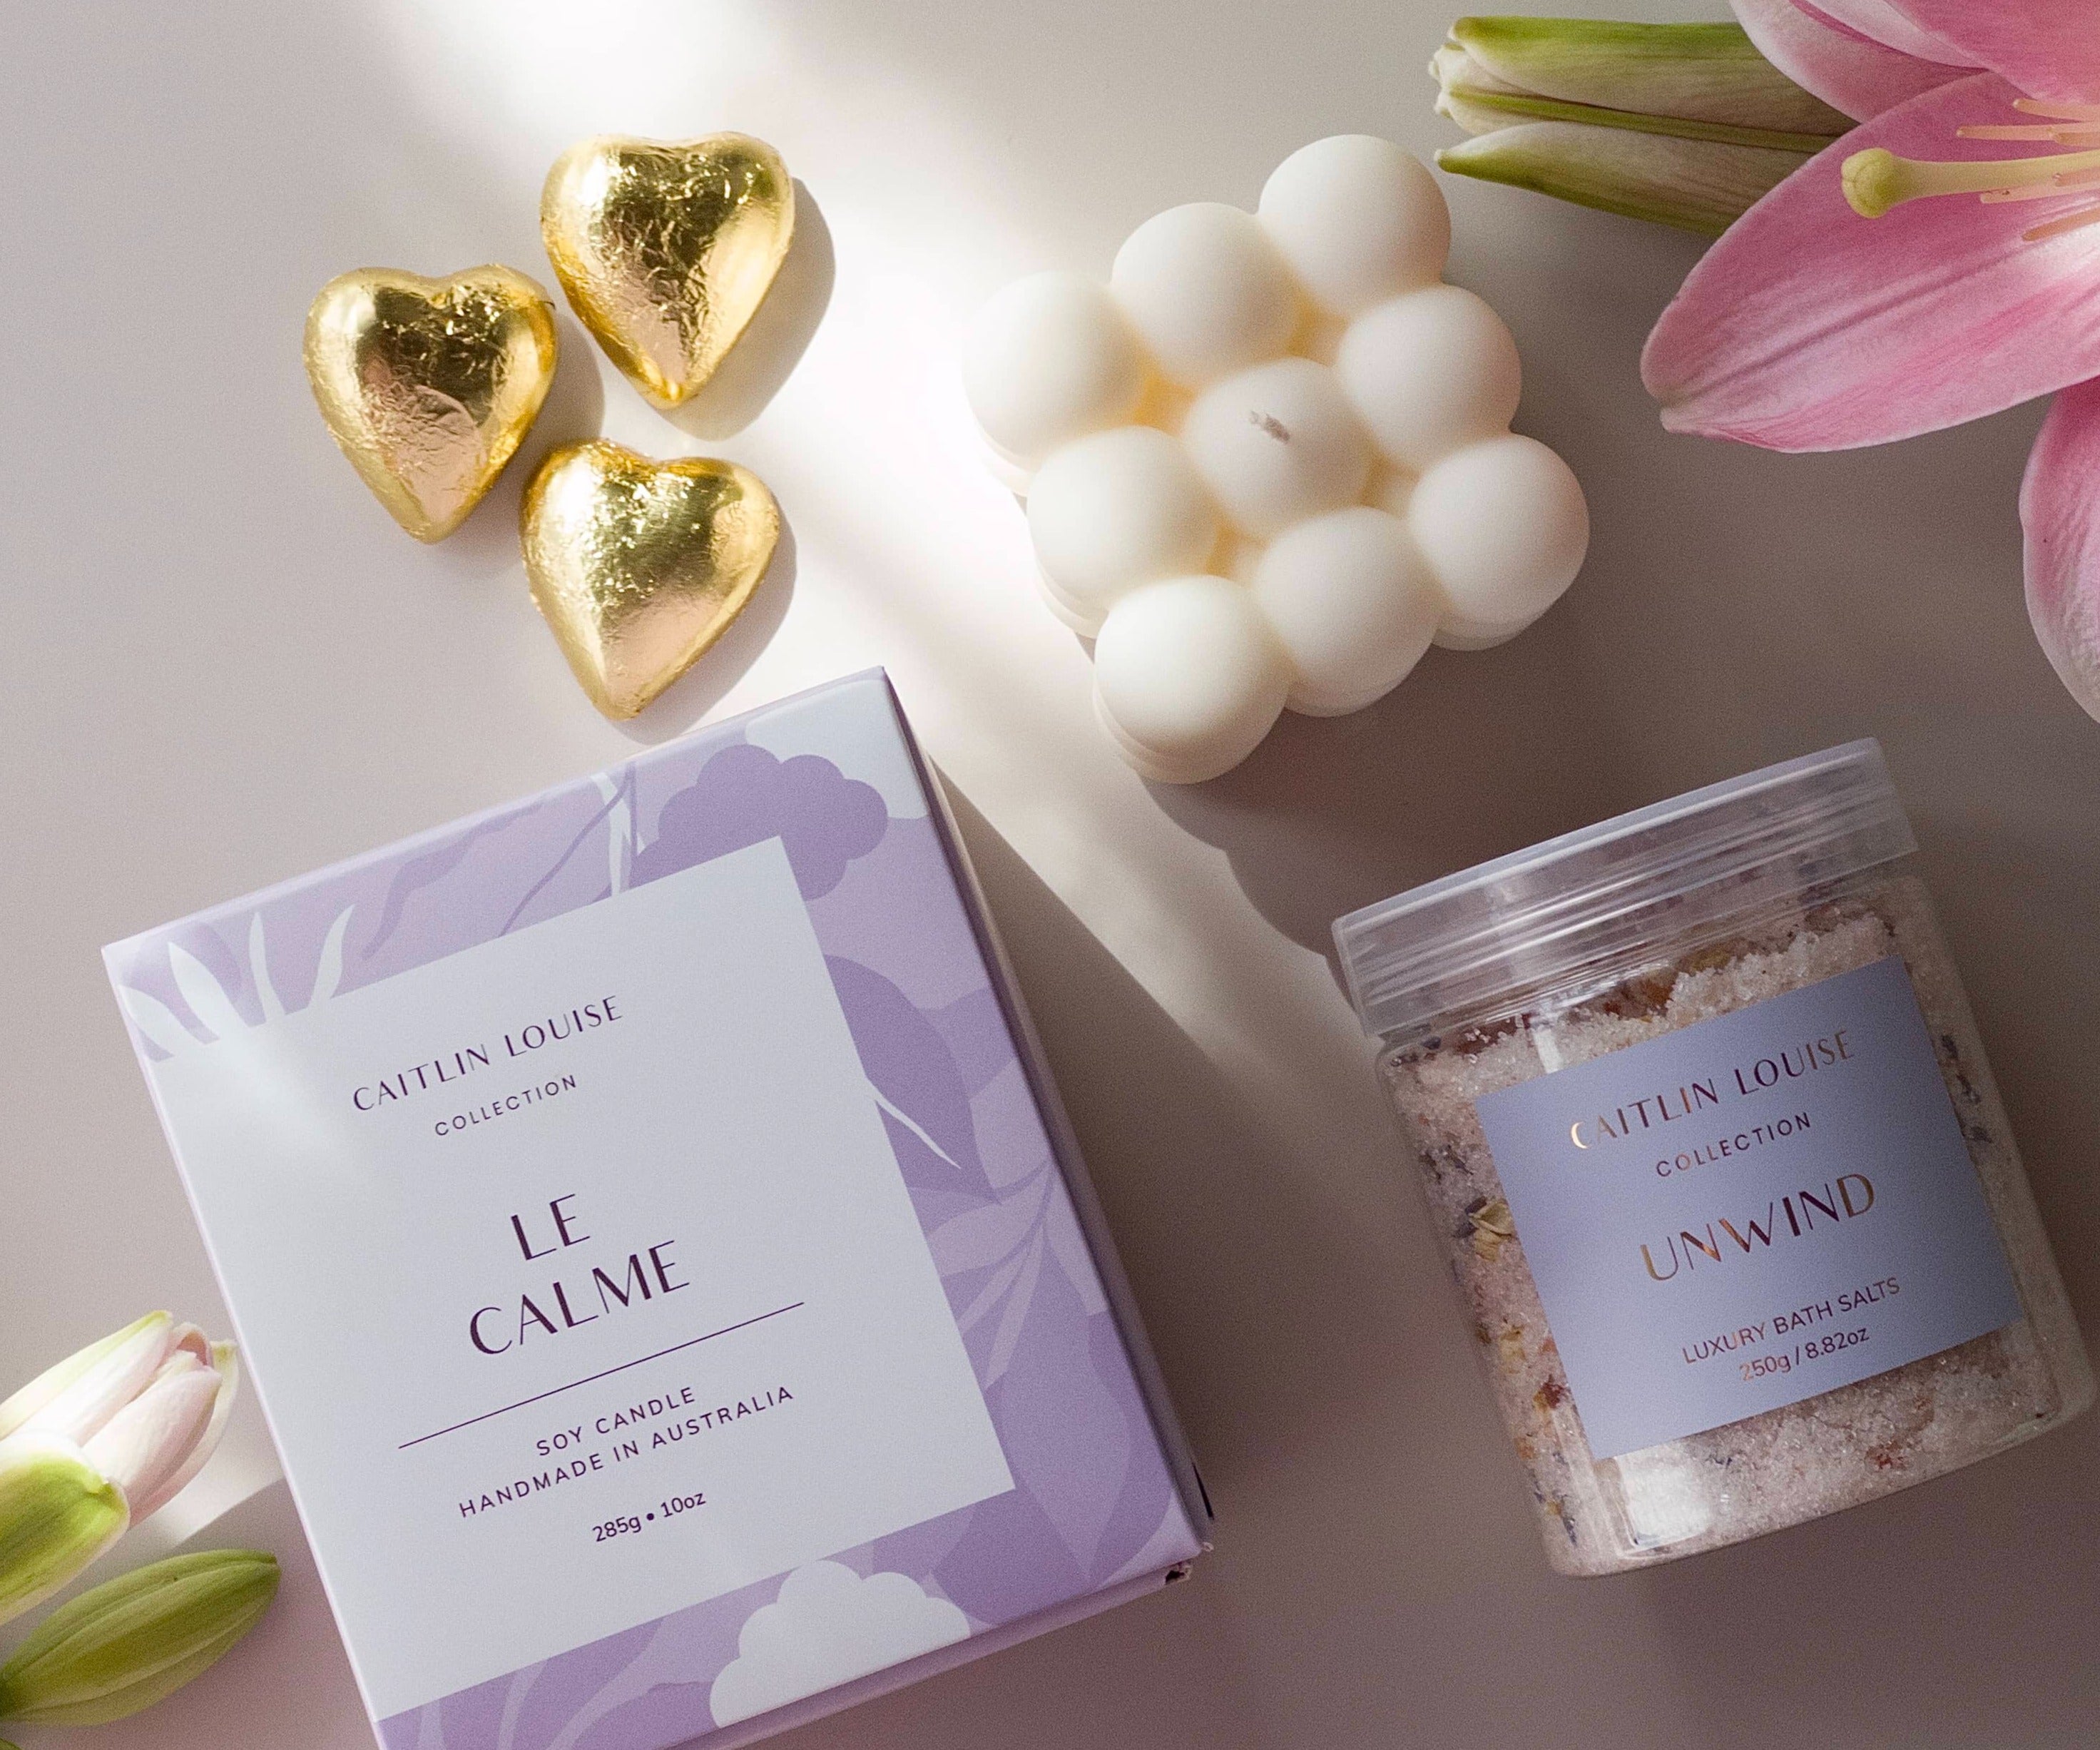 Flat lay of products in gift hamper - le calme scented candle, unwine bath salts, amara bubble cube candle and three heart chocolates - surrounded by flowers.